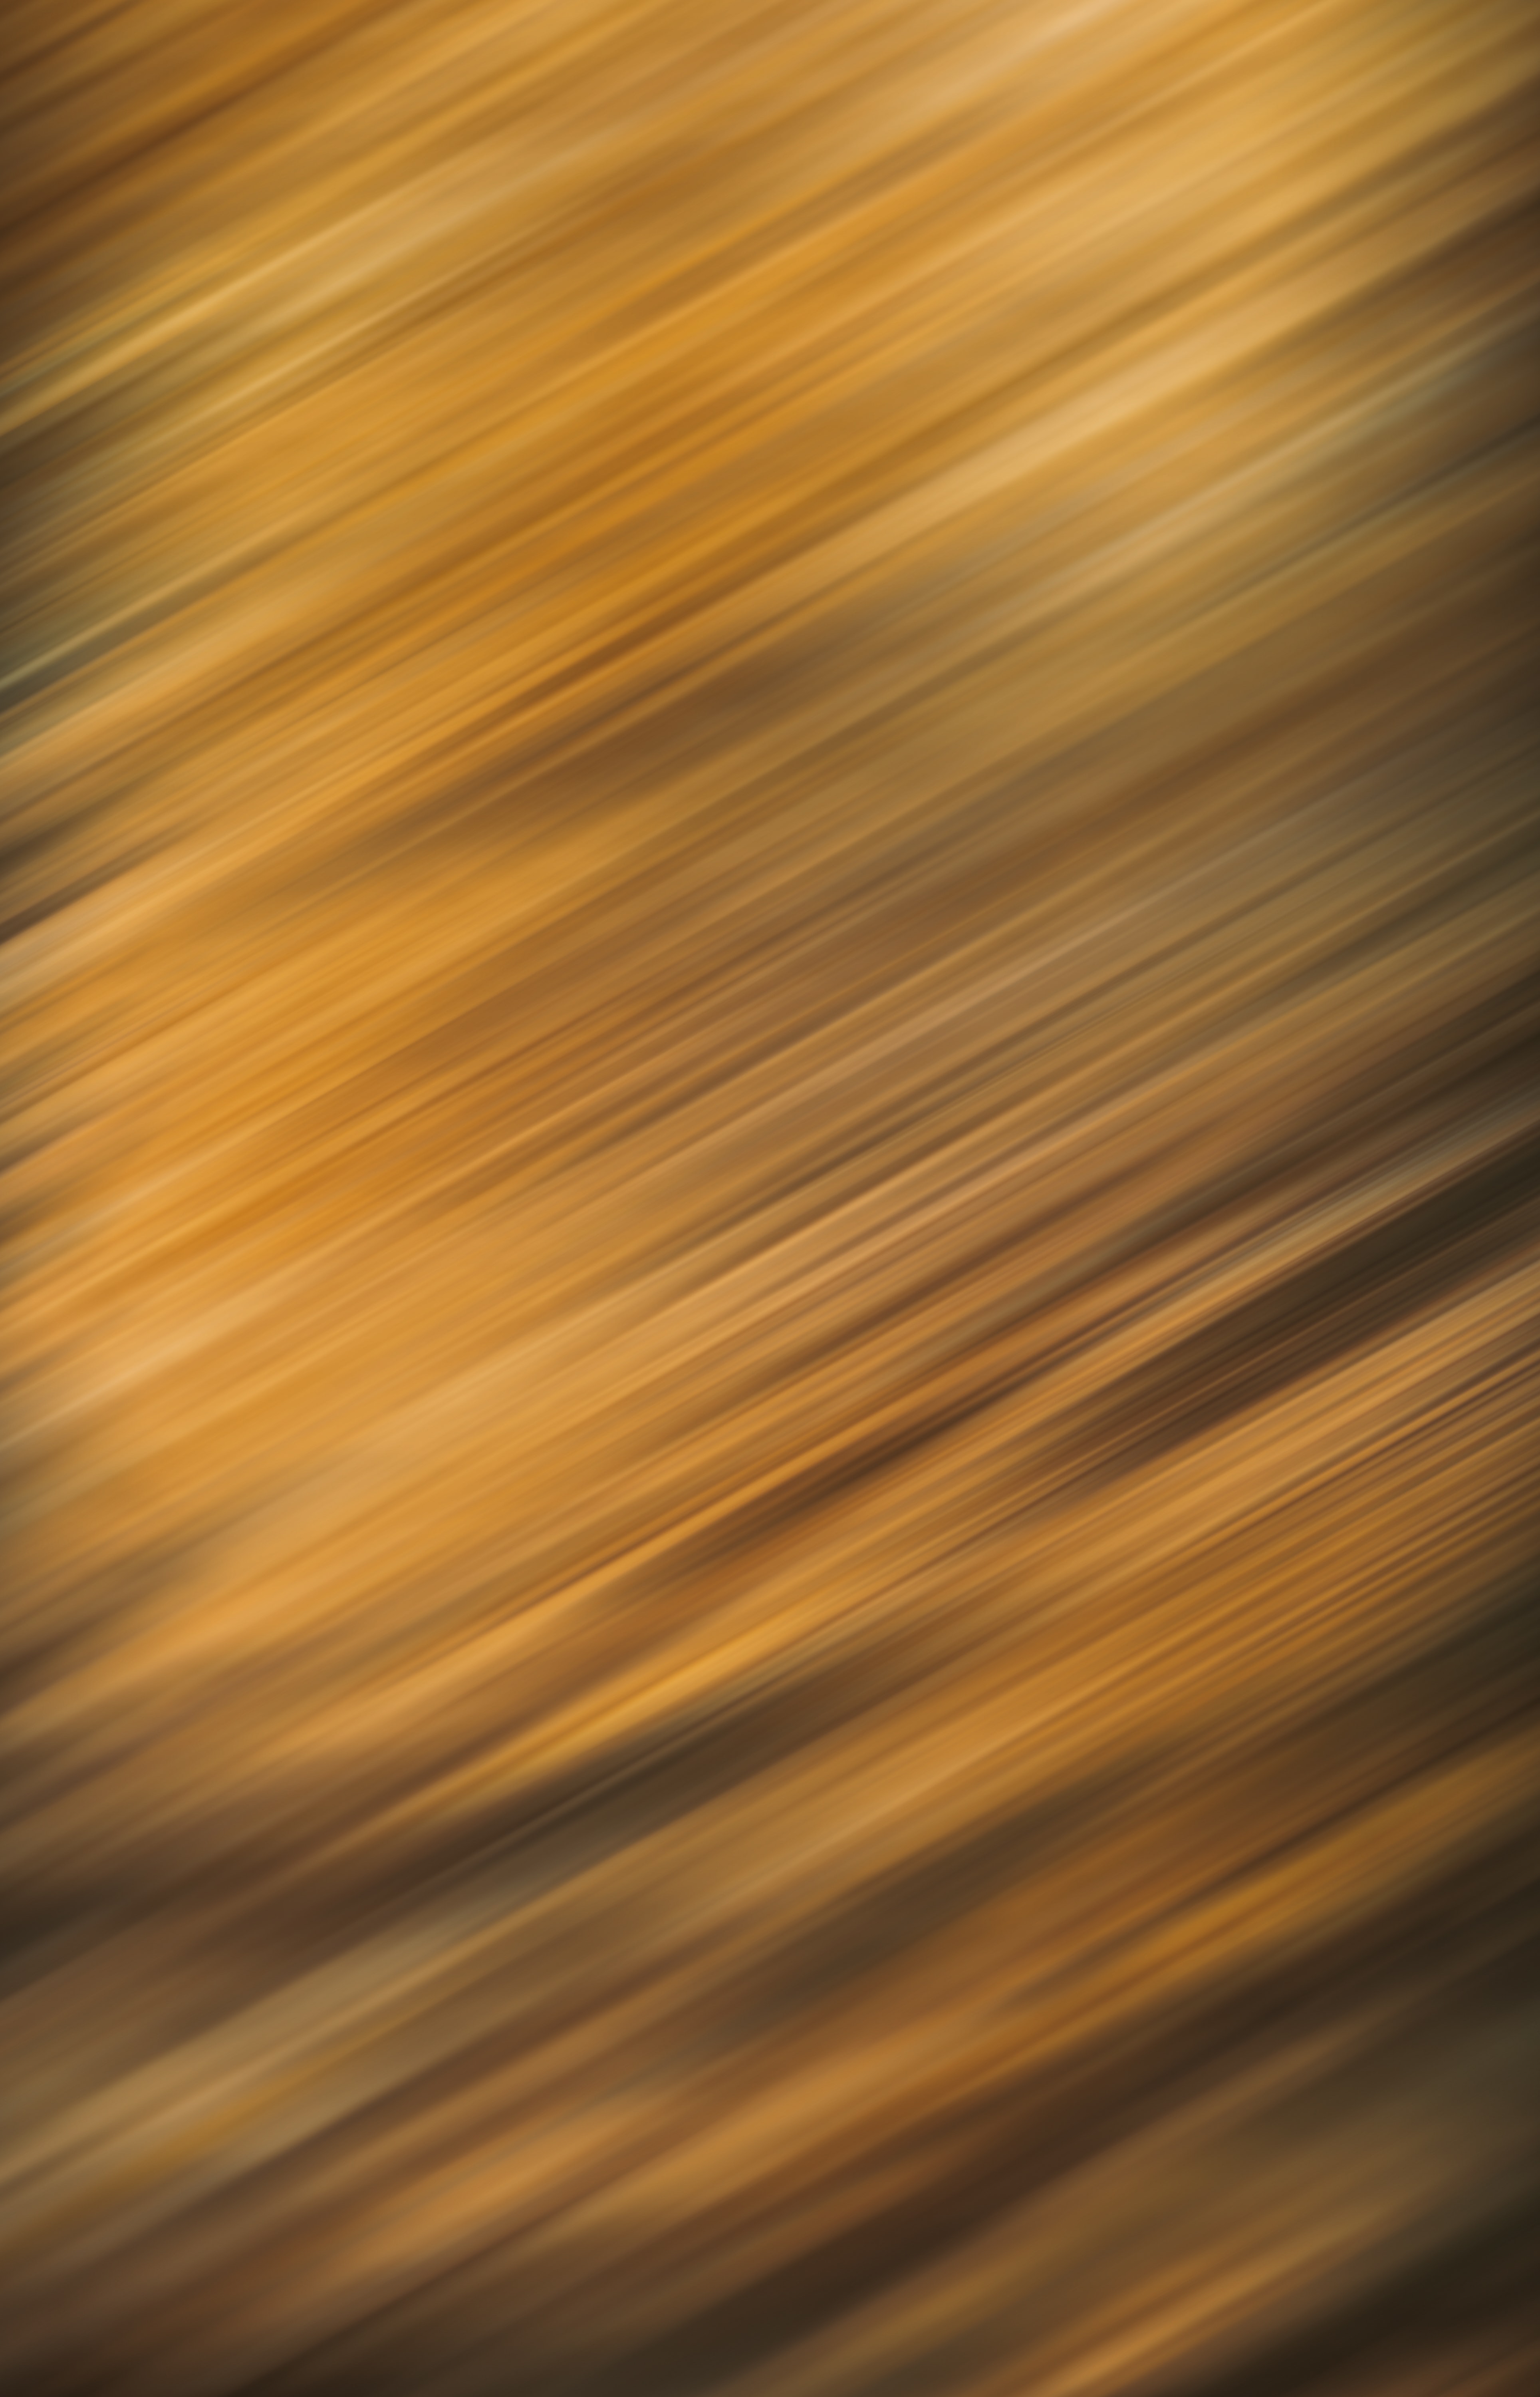 abstract, obliquely, blur, smooth, brown